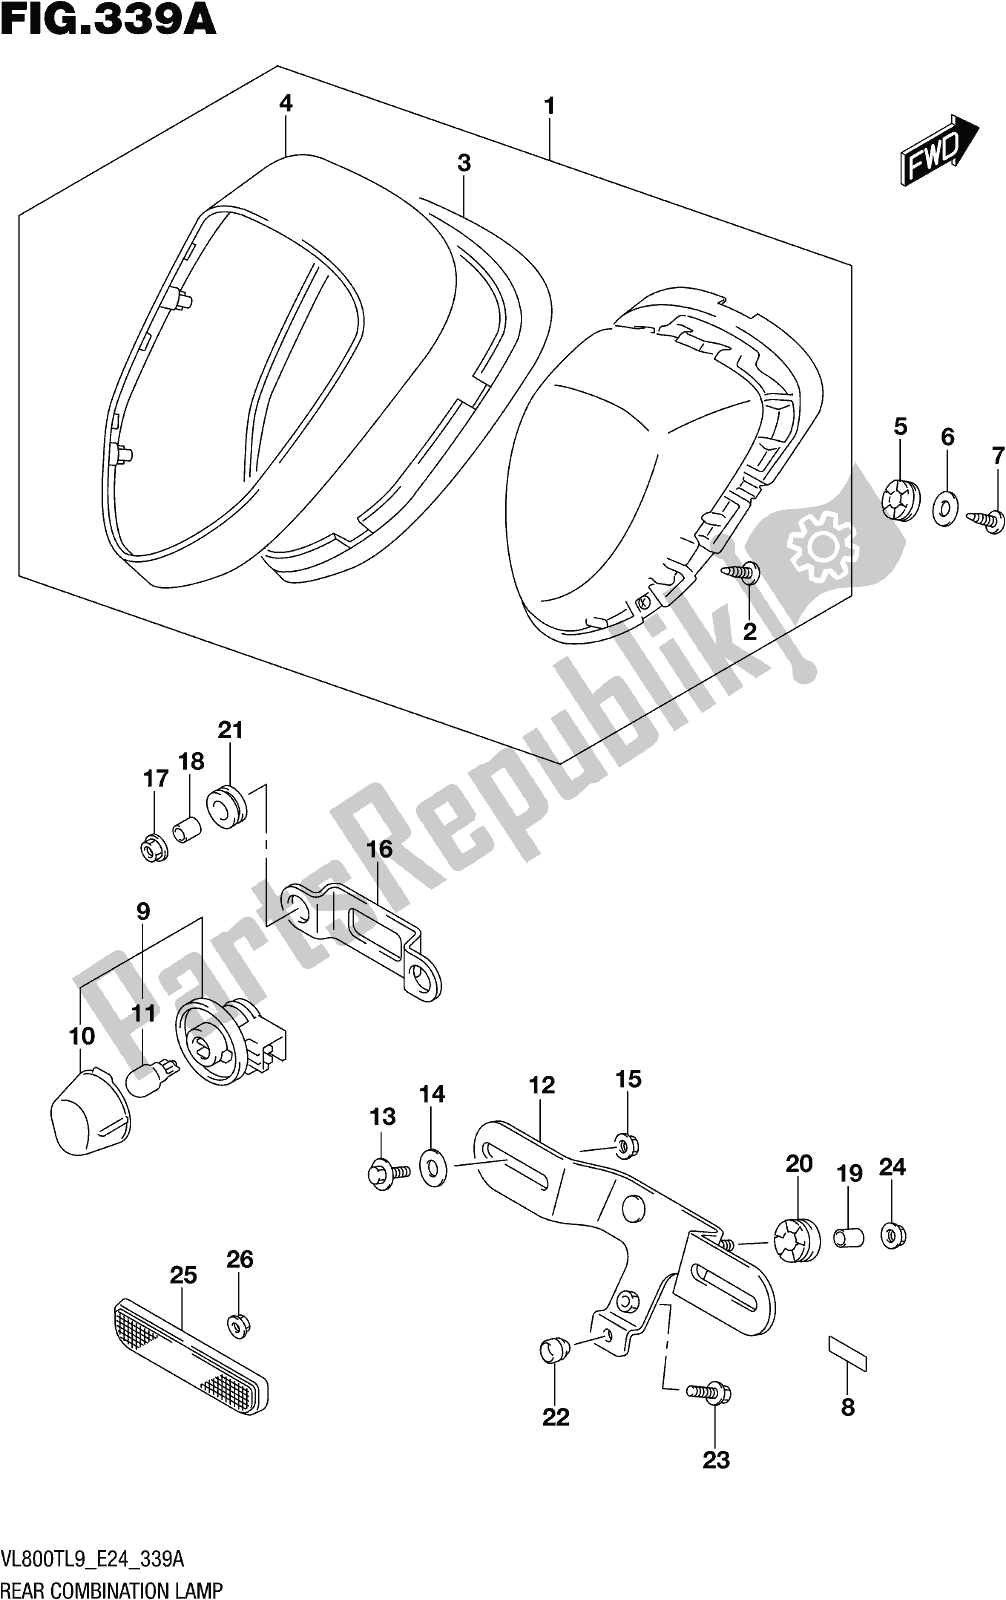 All parts for the Fig. 339a Rear Combination Lamp of the Suzuki VL 800T 2019